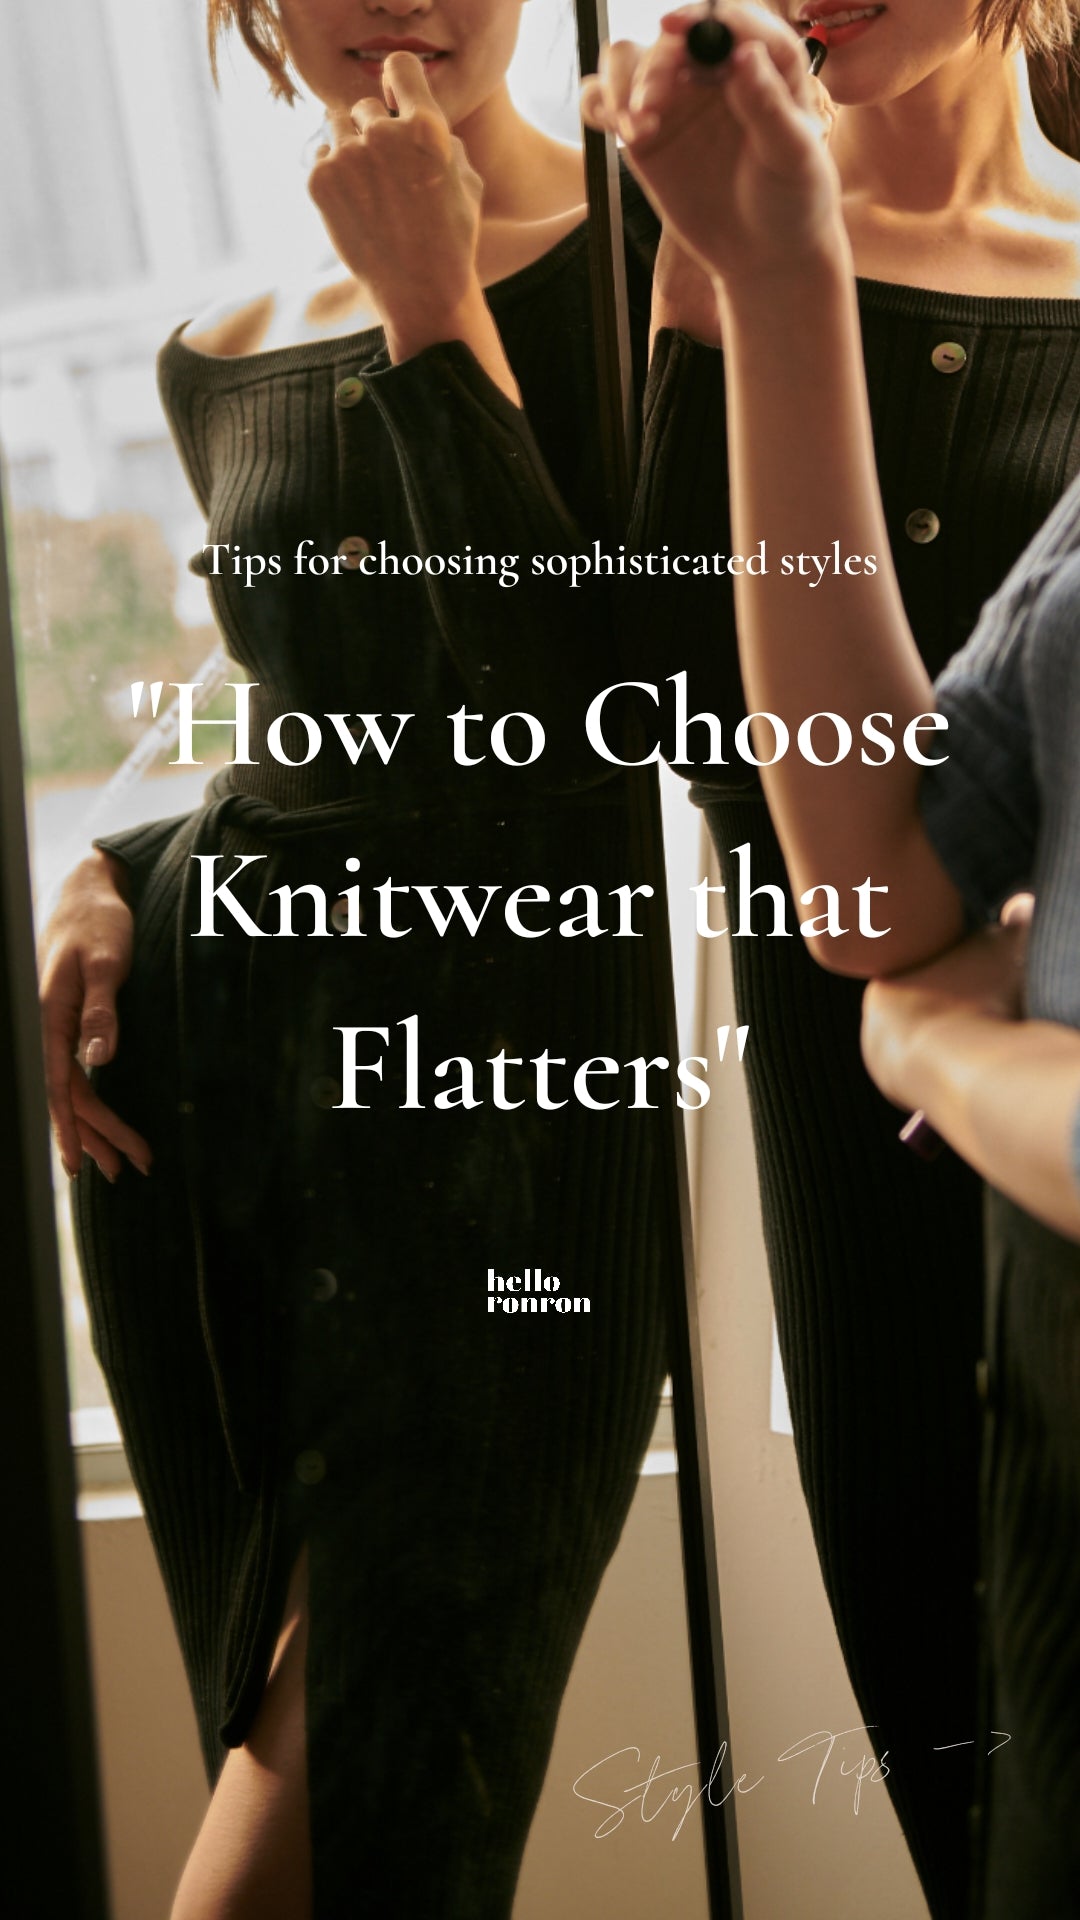 How to choose knitwear that flatters the figure?